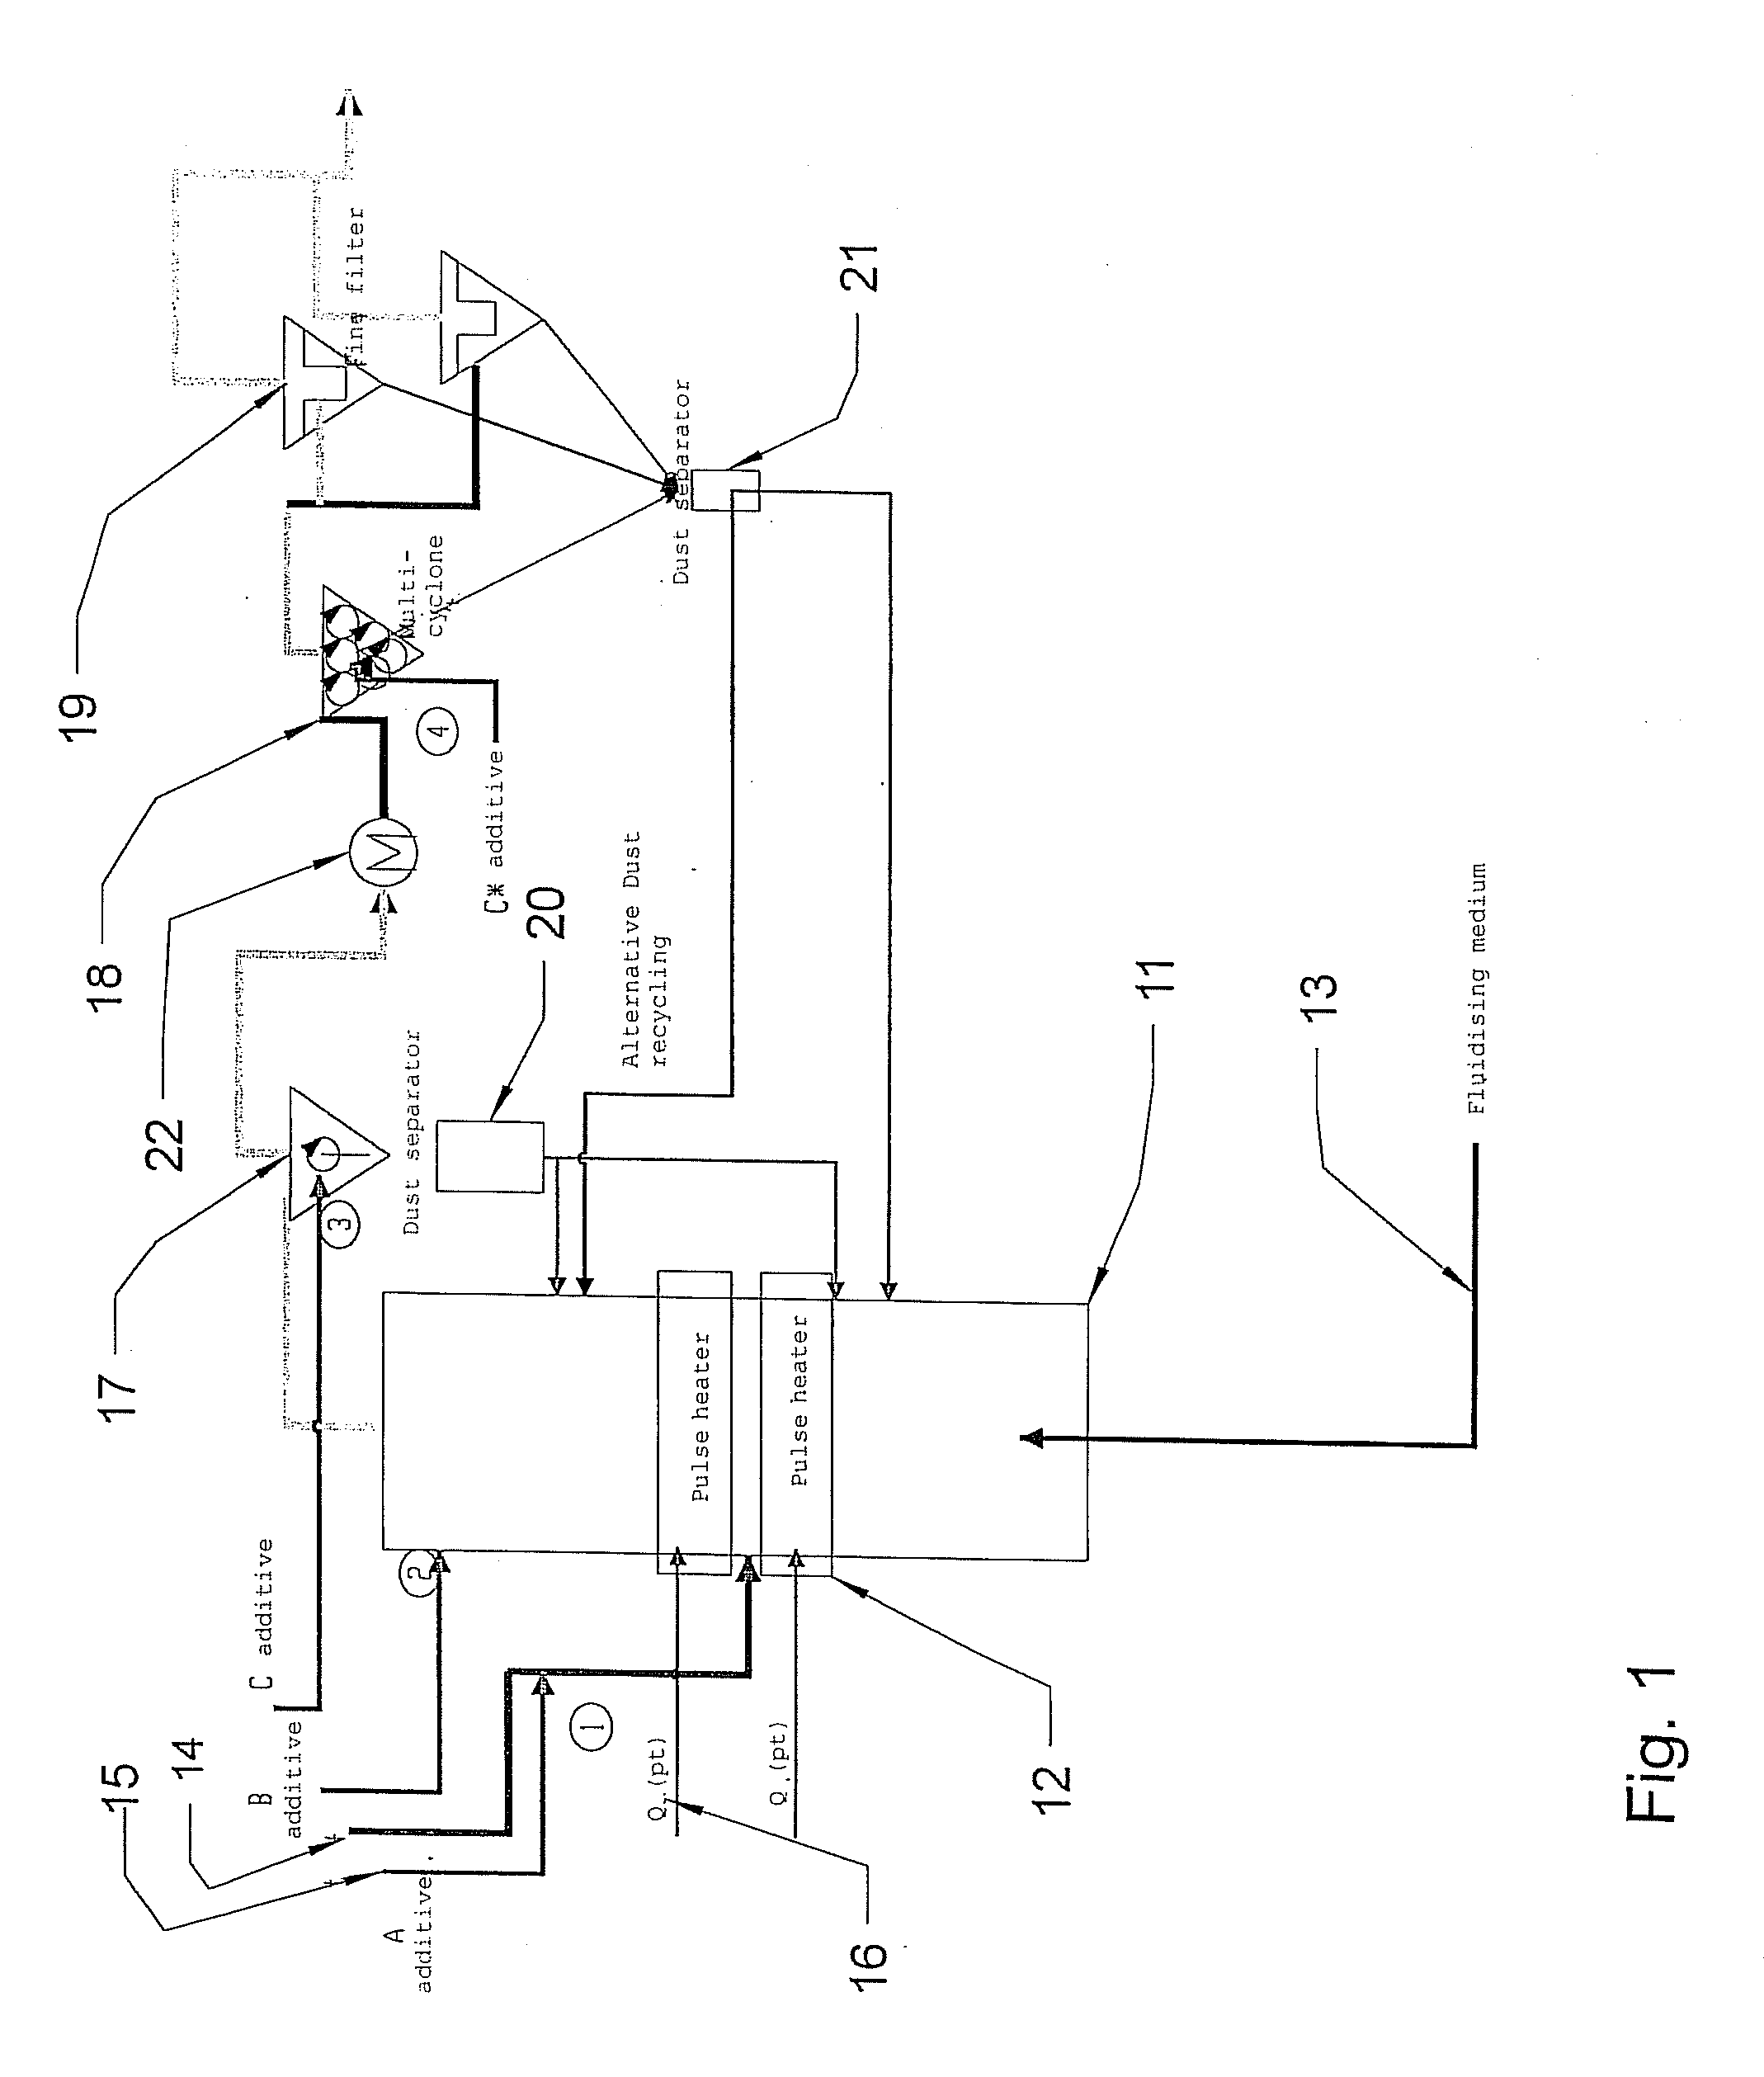 Method and Device for the process-integrated hot gas purification of dust and gas components of a synthesis gas